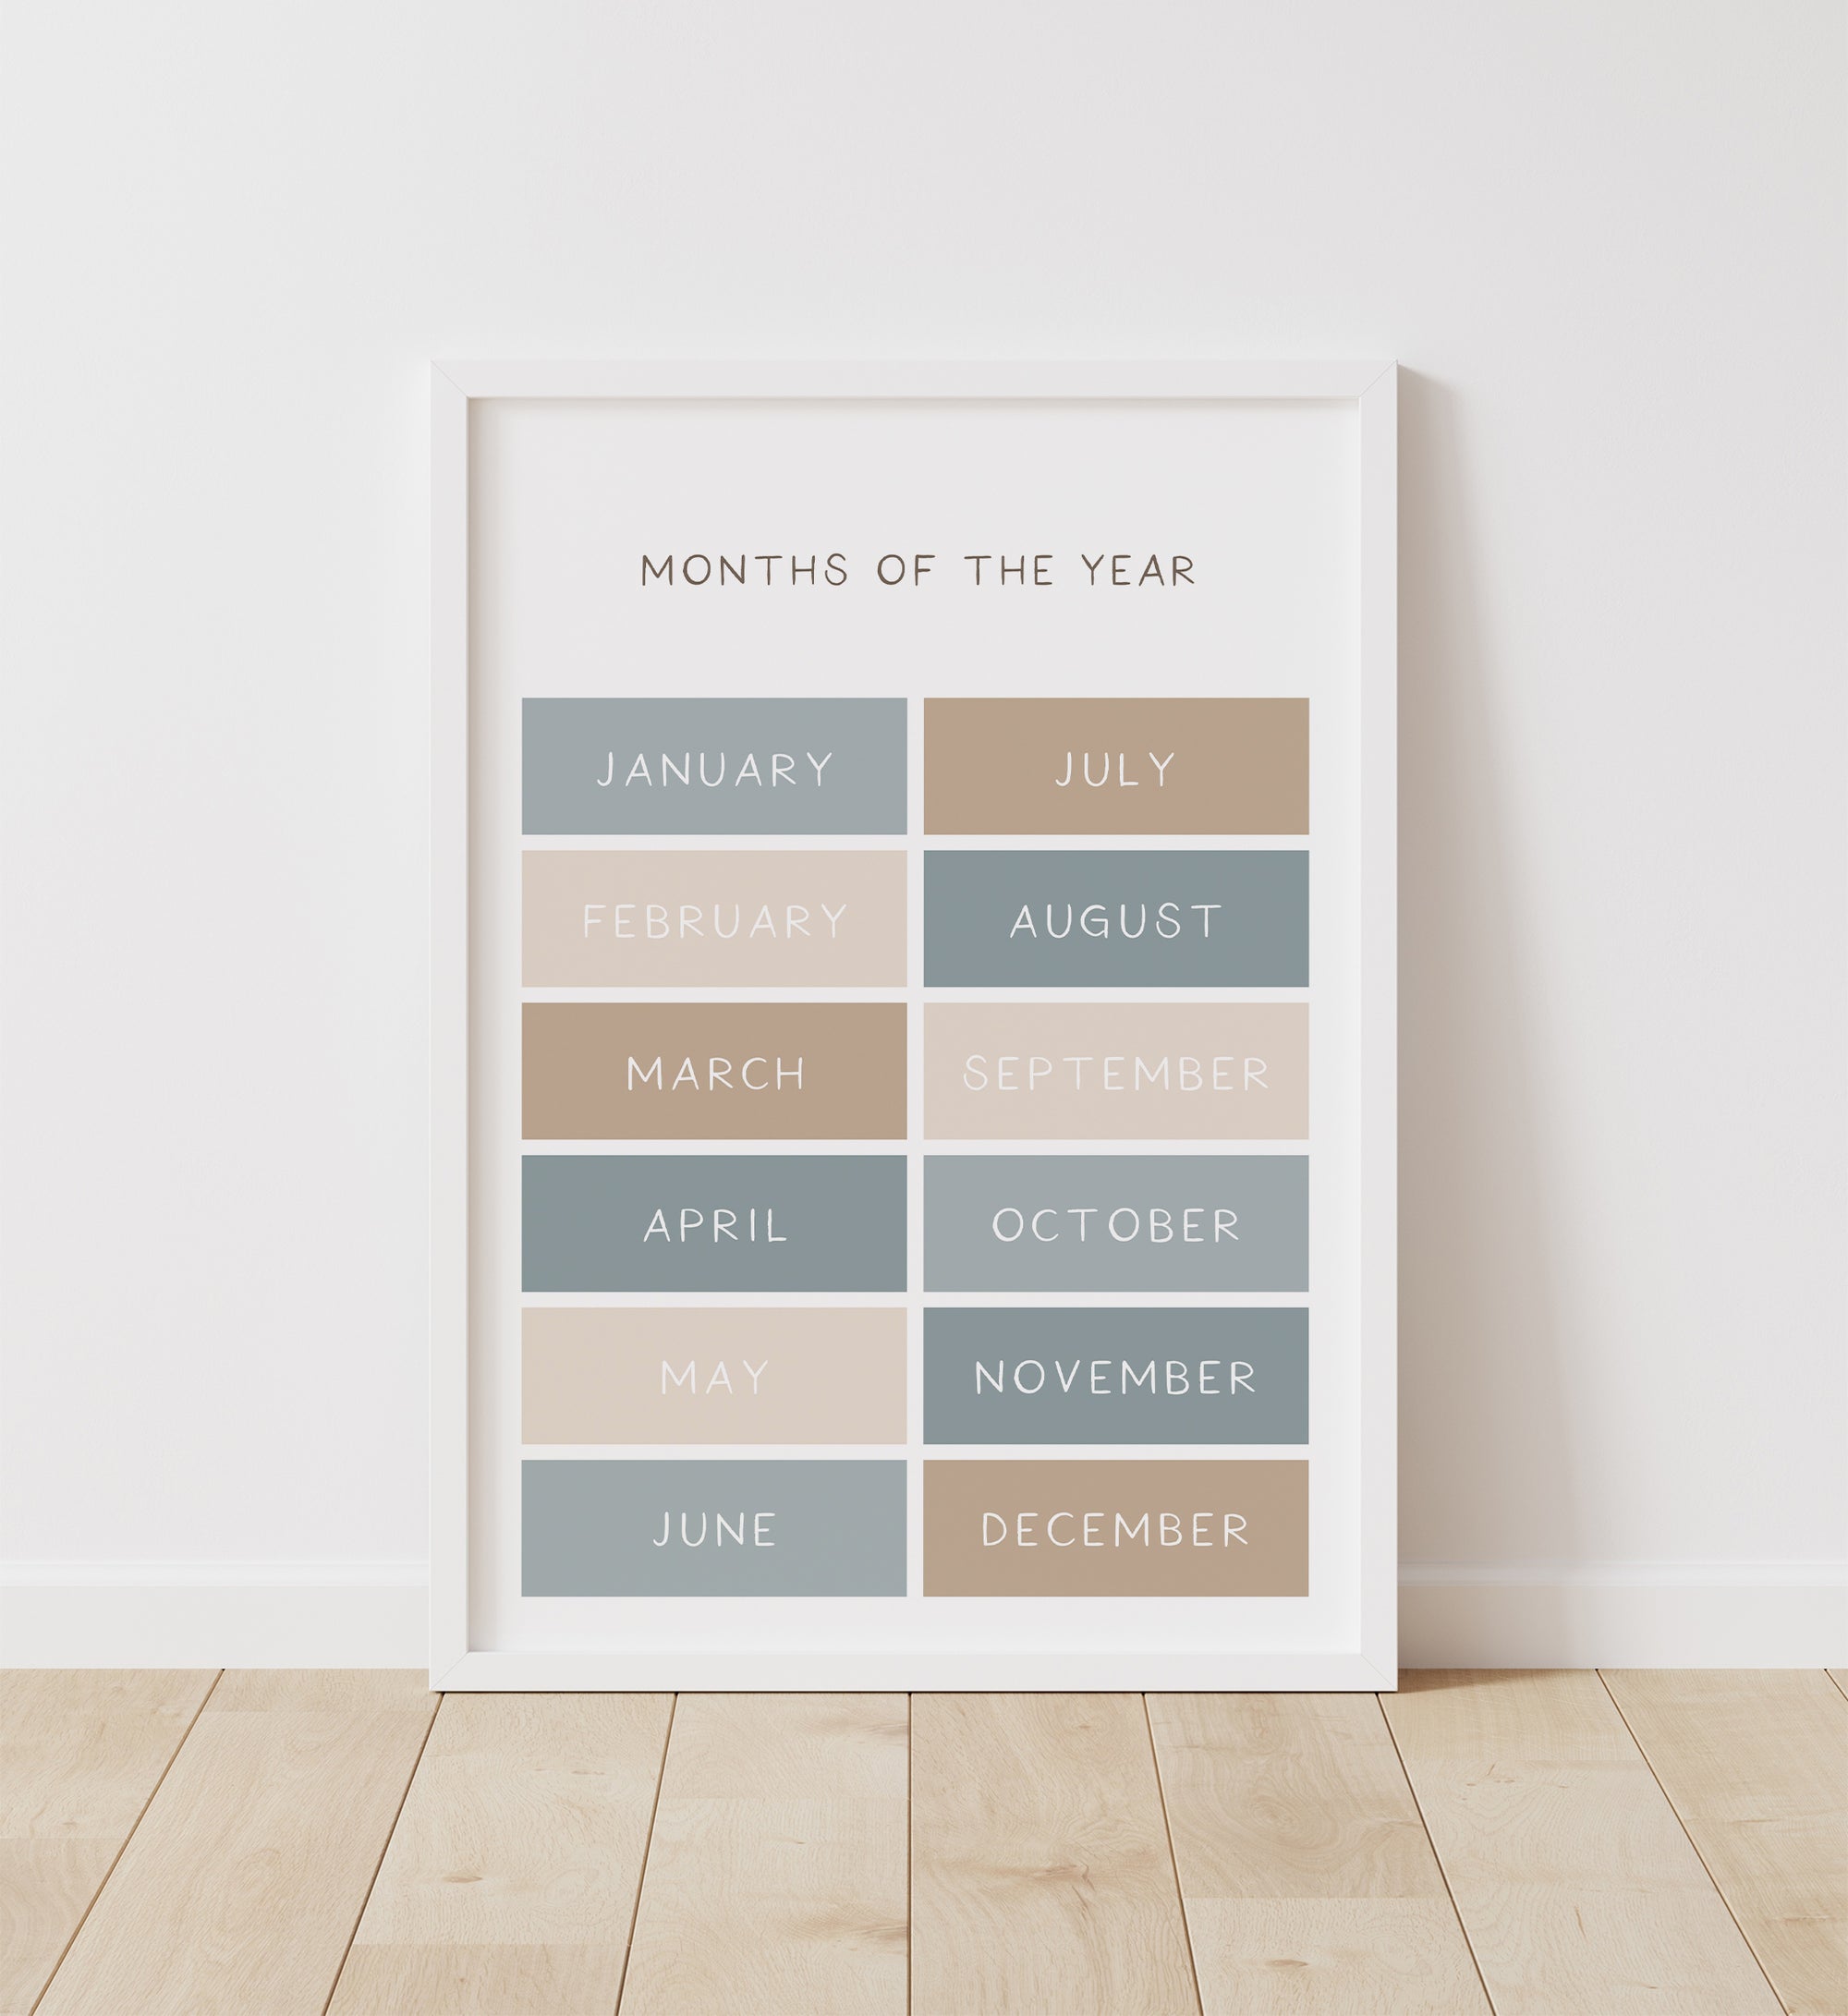 Months of the Year Print - BNCP